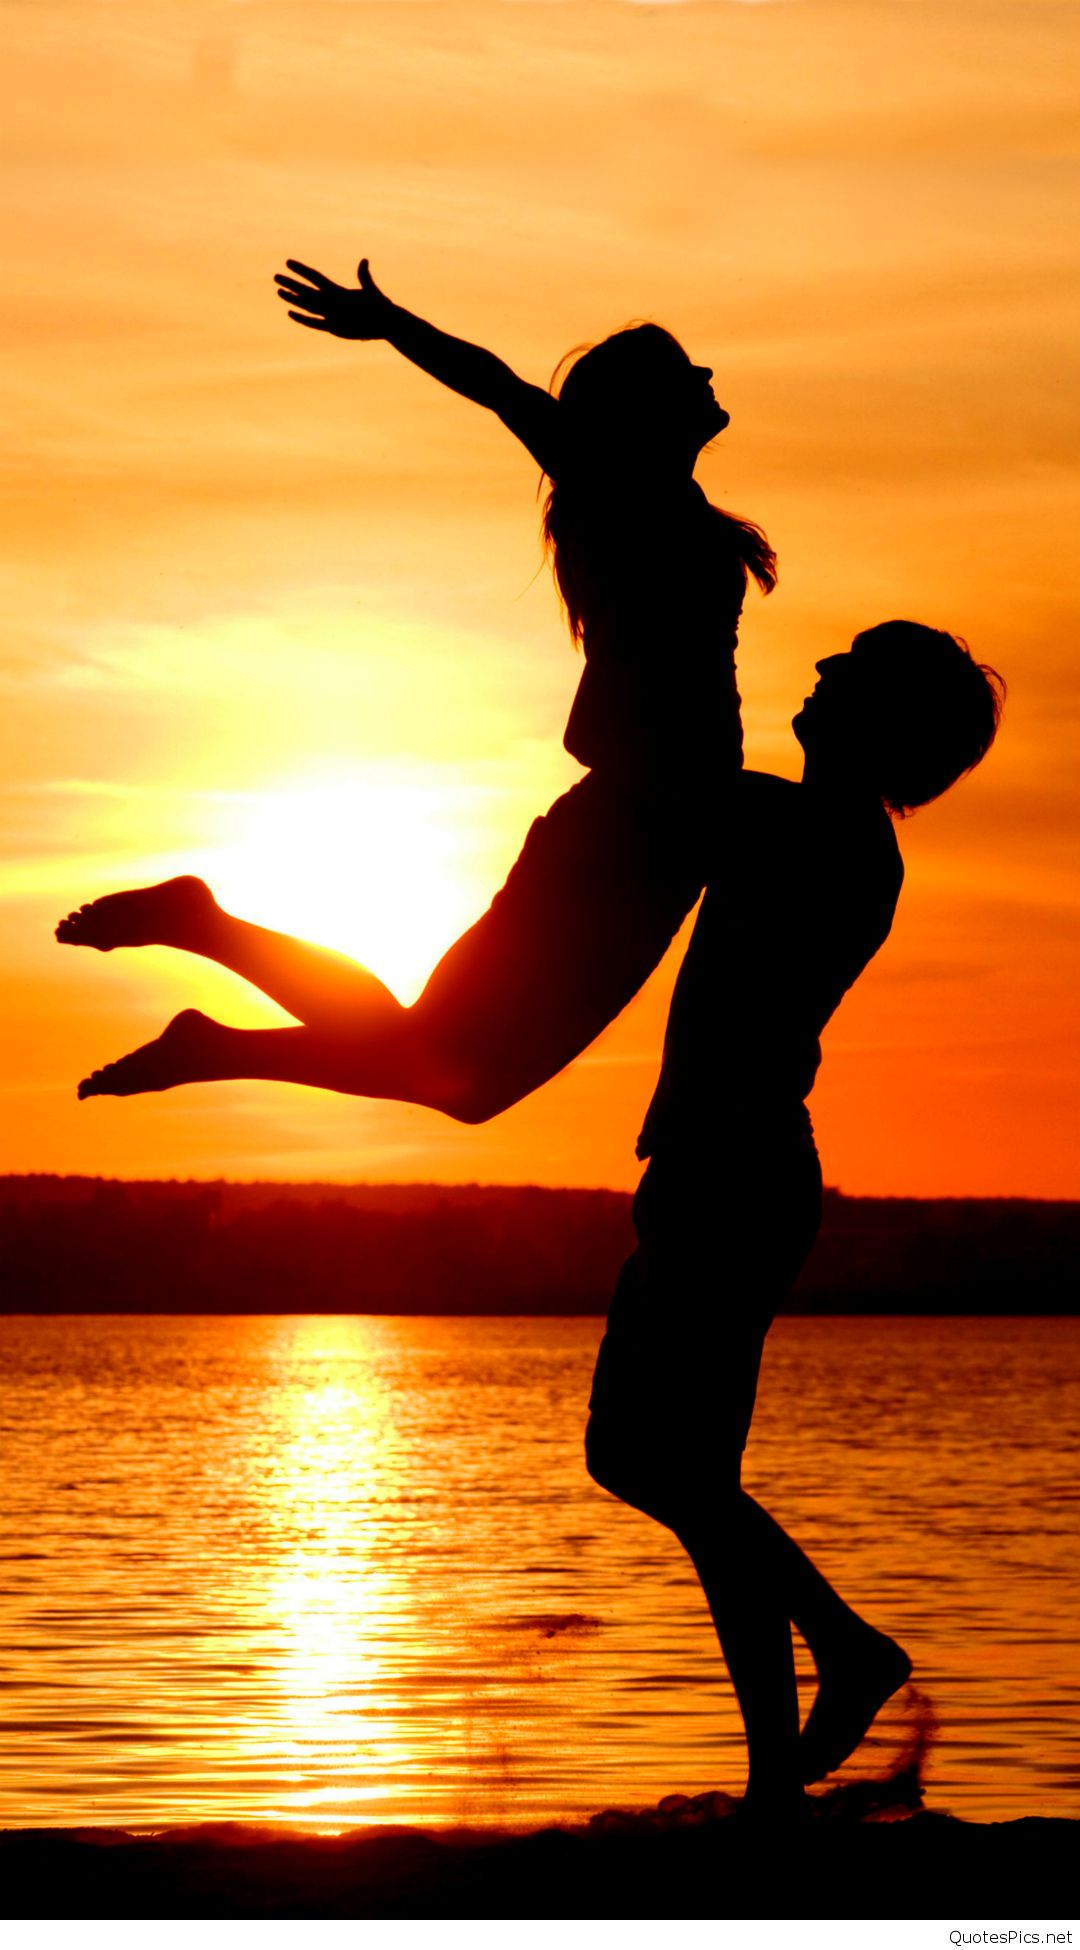 hd love couple wallpapers for mobile,people in nature,happy,silhouette,fun,dancer